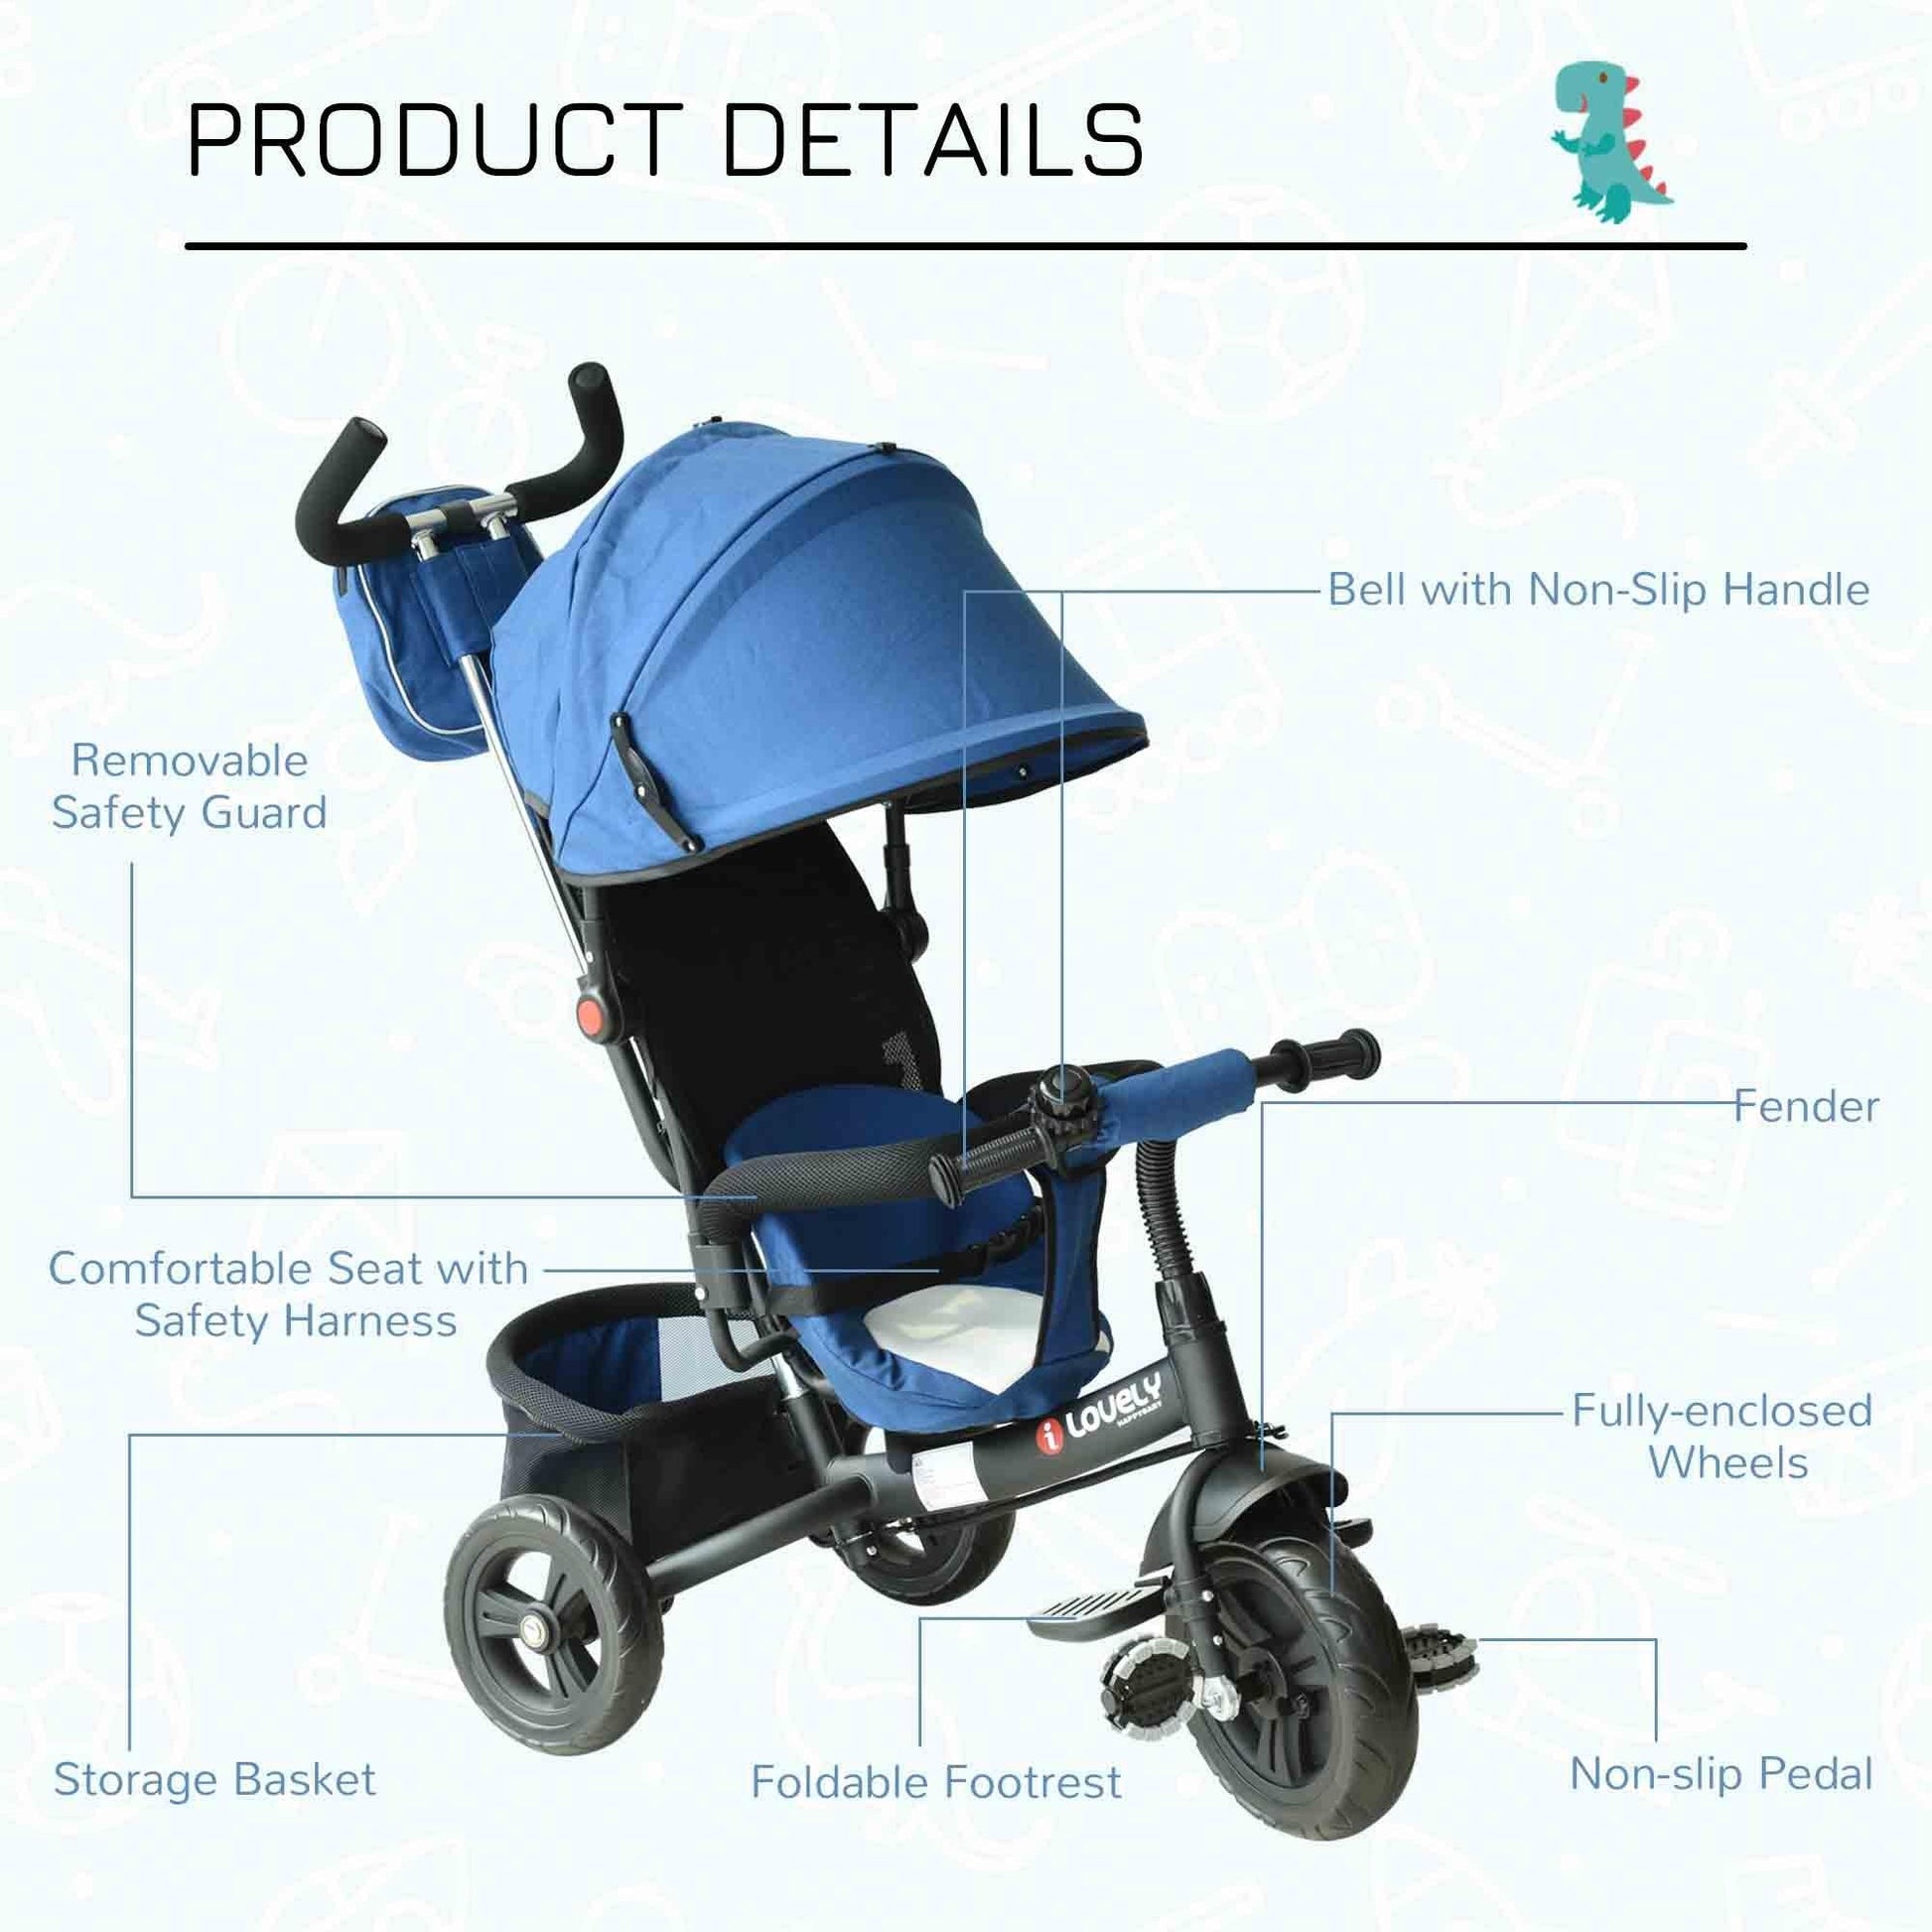 HOMCOM Baby Tricycle with Canopy - Blue - ALL4U RETAILER LTD